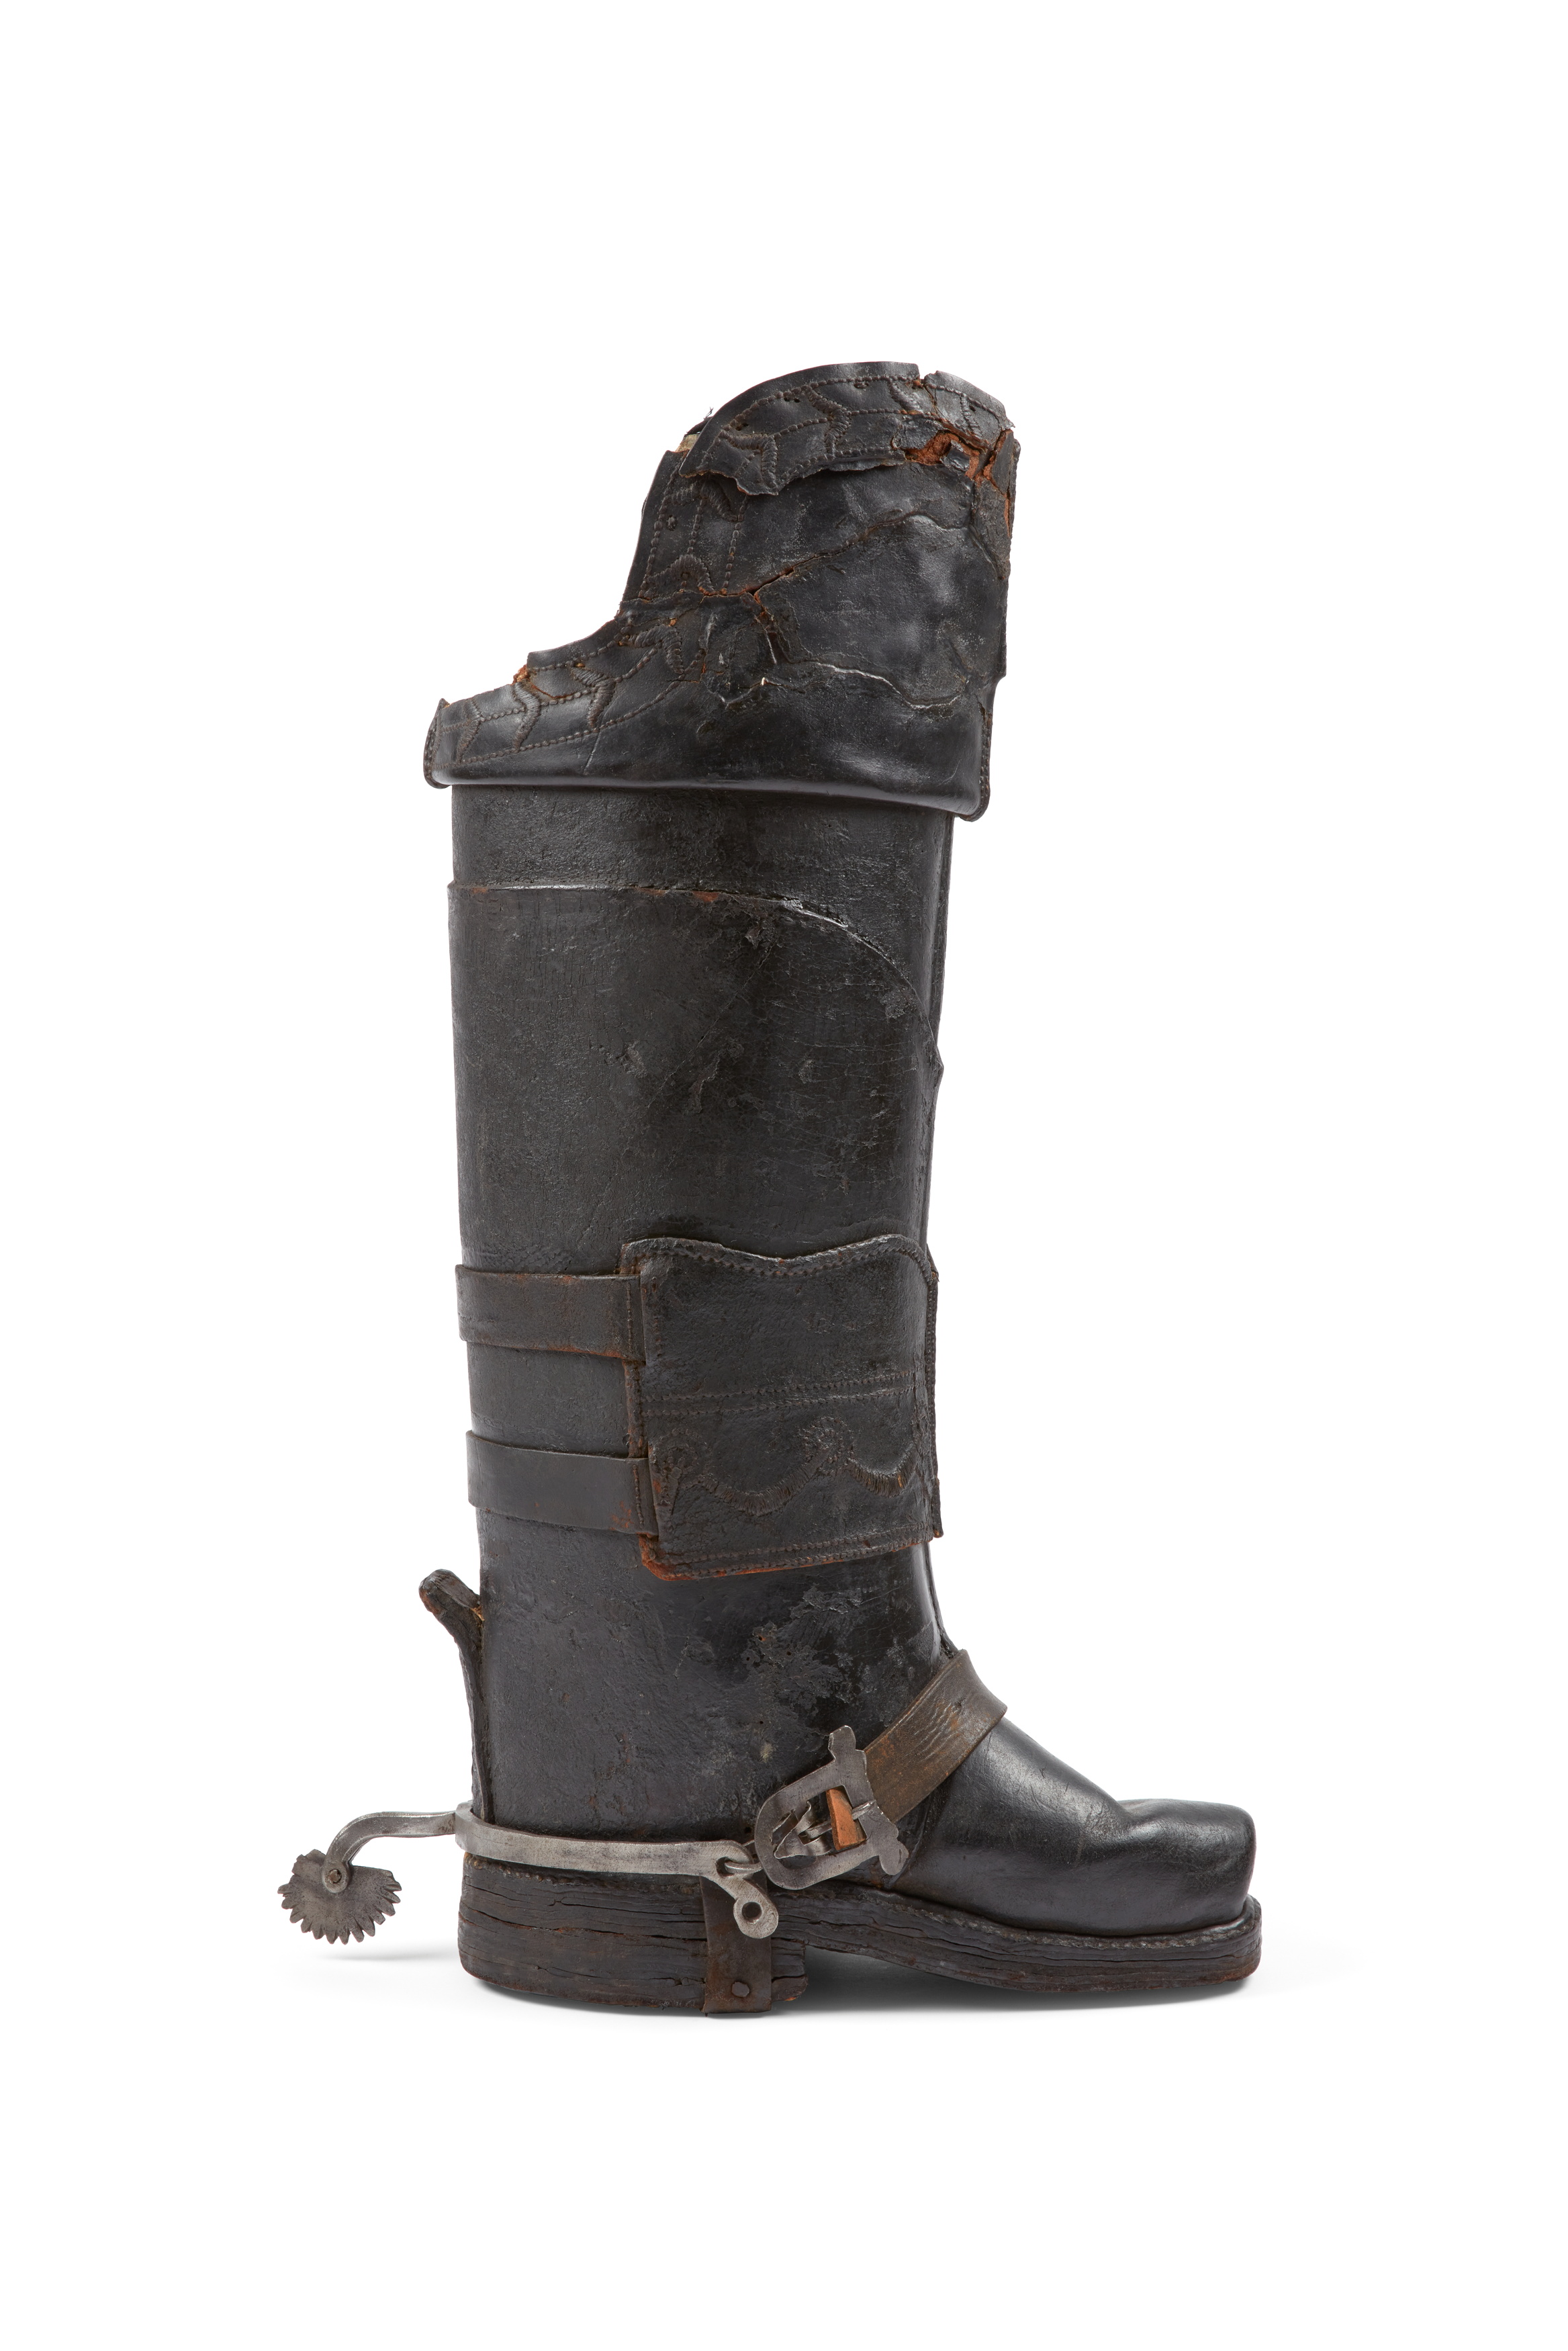 Postillion boot with spur from the Joseph Box collection